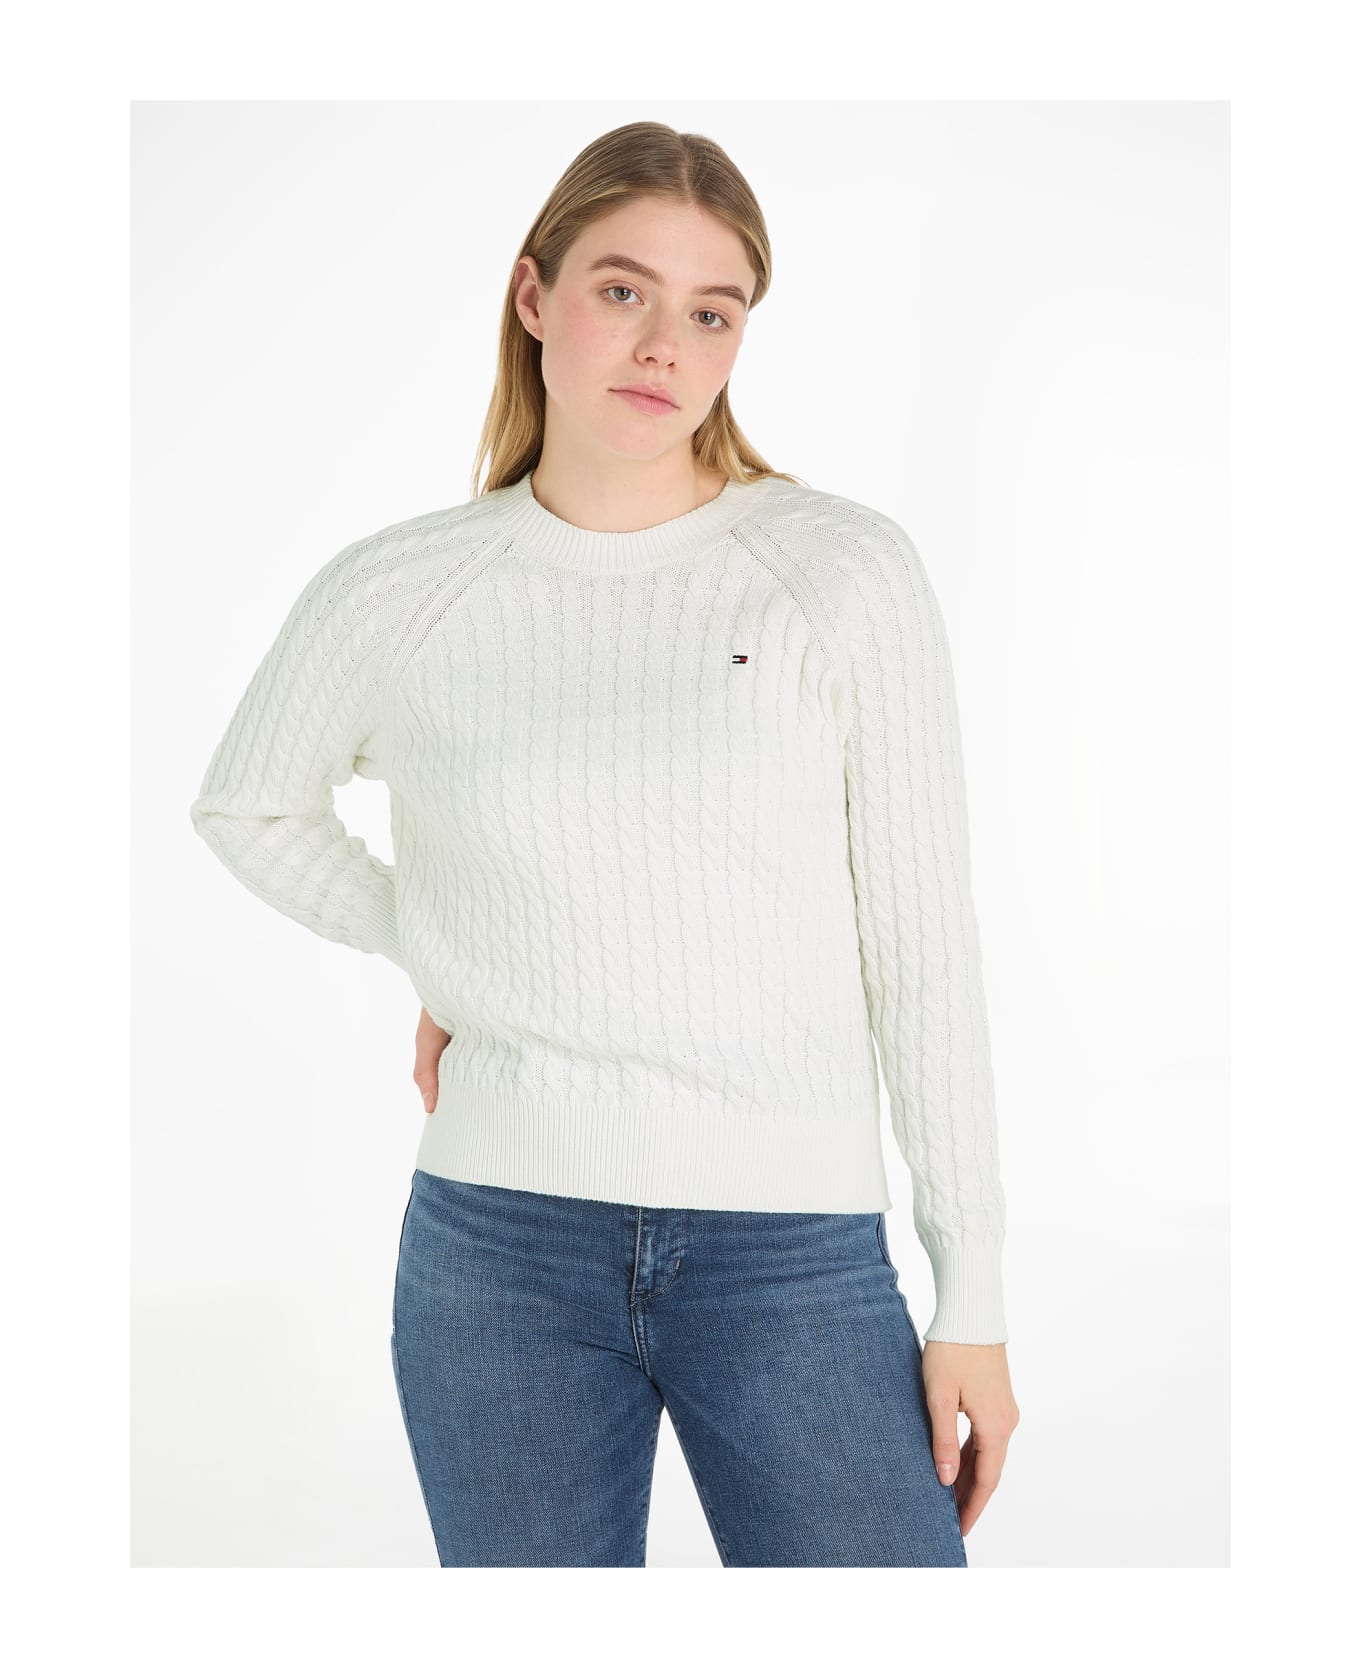 Tommy Hilfiger White Relaxed-fit Sweater In Woven Knit - ECRU